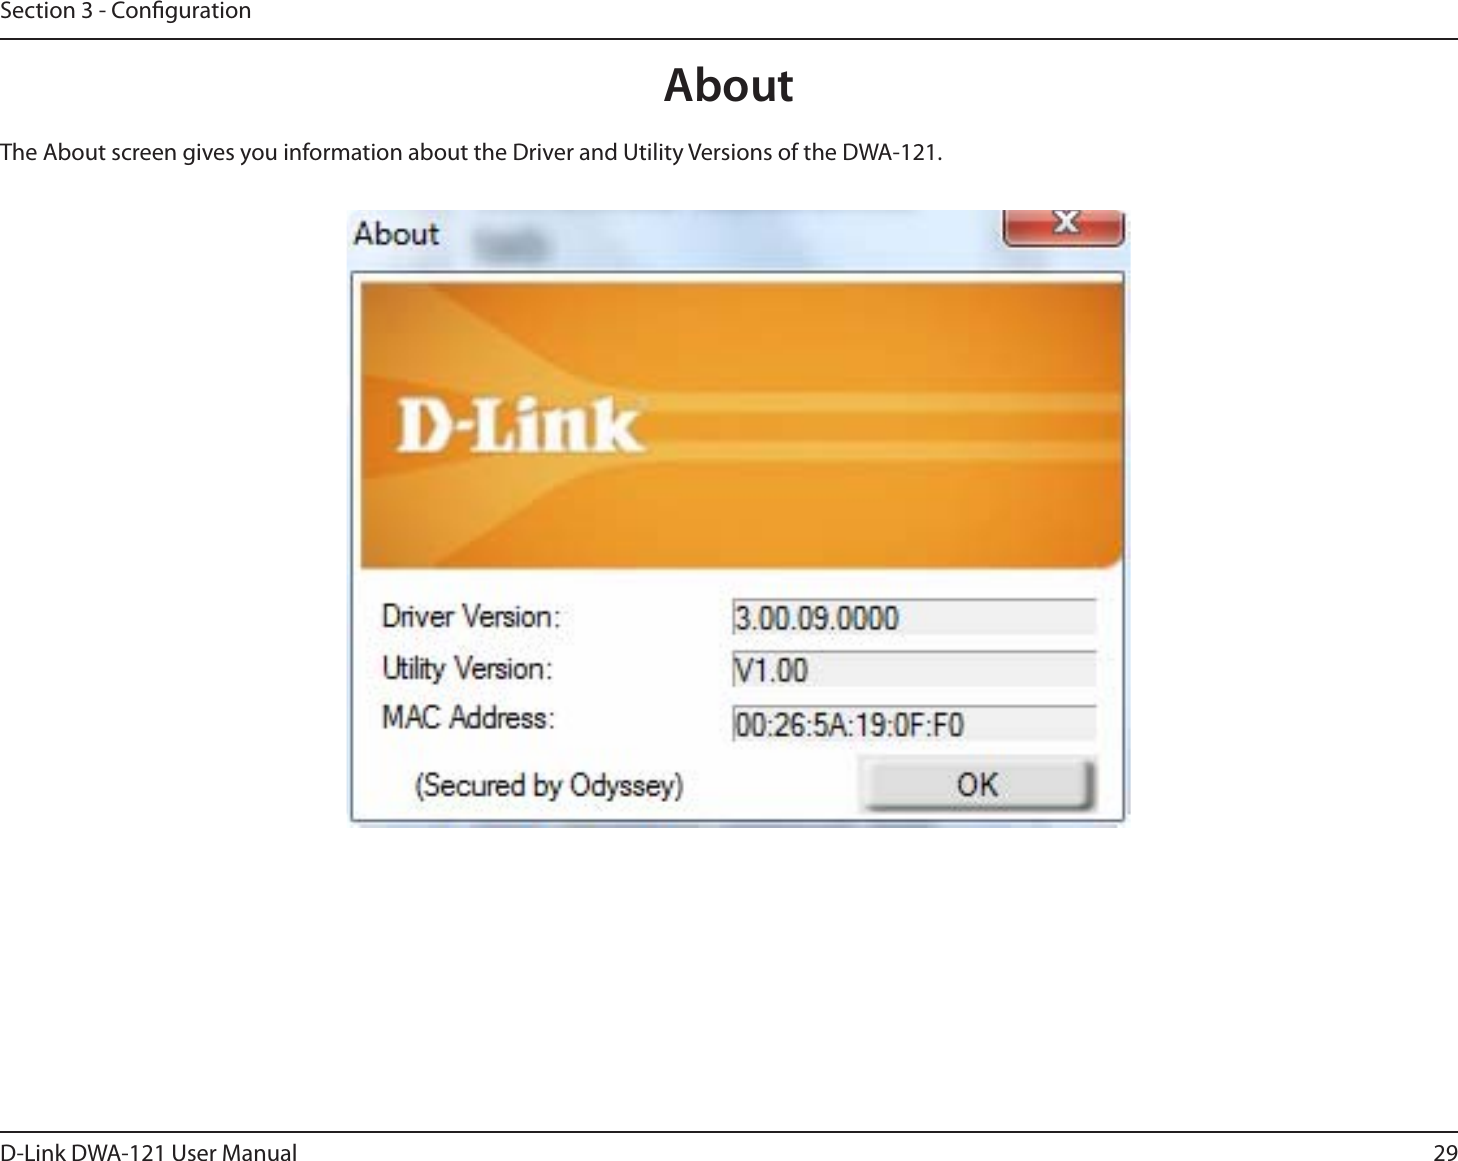 29D-Link DWA-121 User ManualSection 3 - CongurationThe About screen gives you information about the Driver and Utility Versions of the DWA-121.About